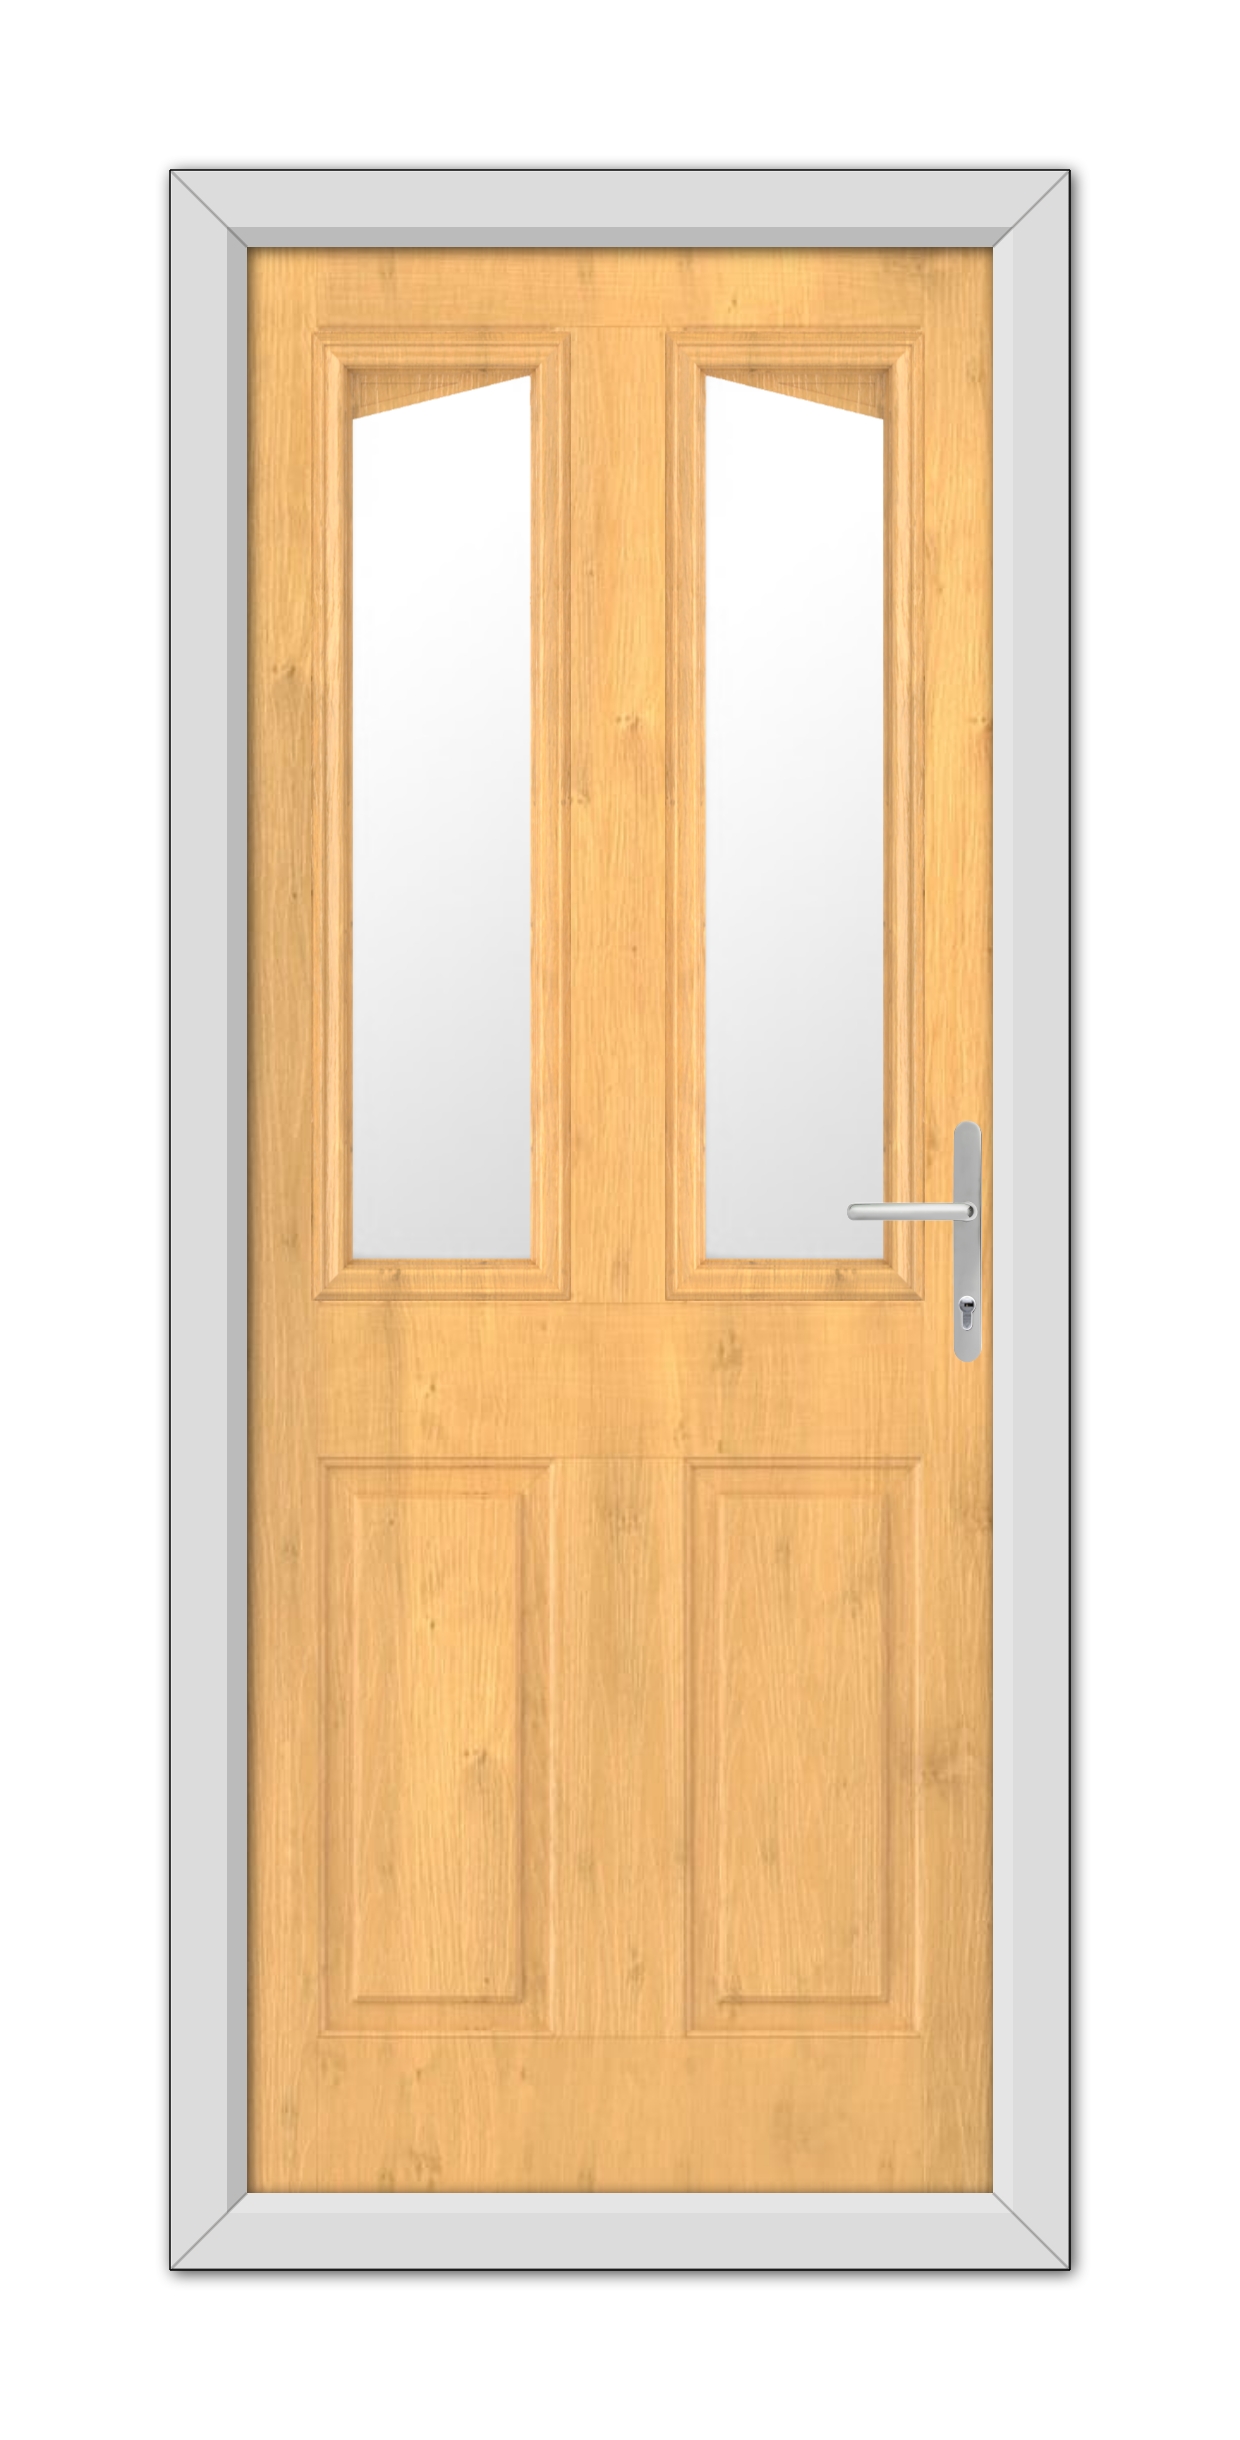 A Irish Oak Highbury Composite Door 48mm Timber Core with glass panels and a modern handle, set within a gray frame, isolated on a white background.